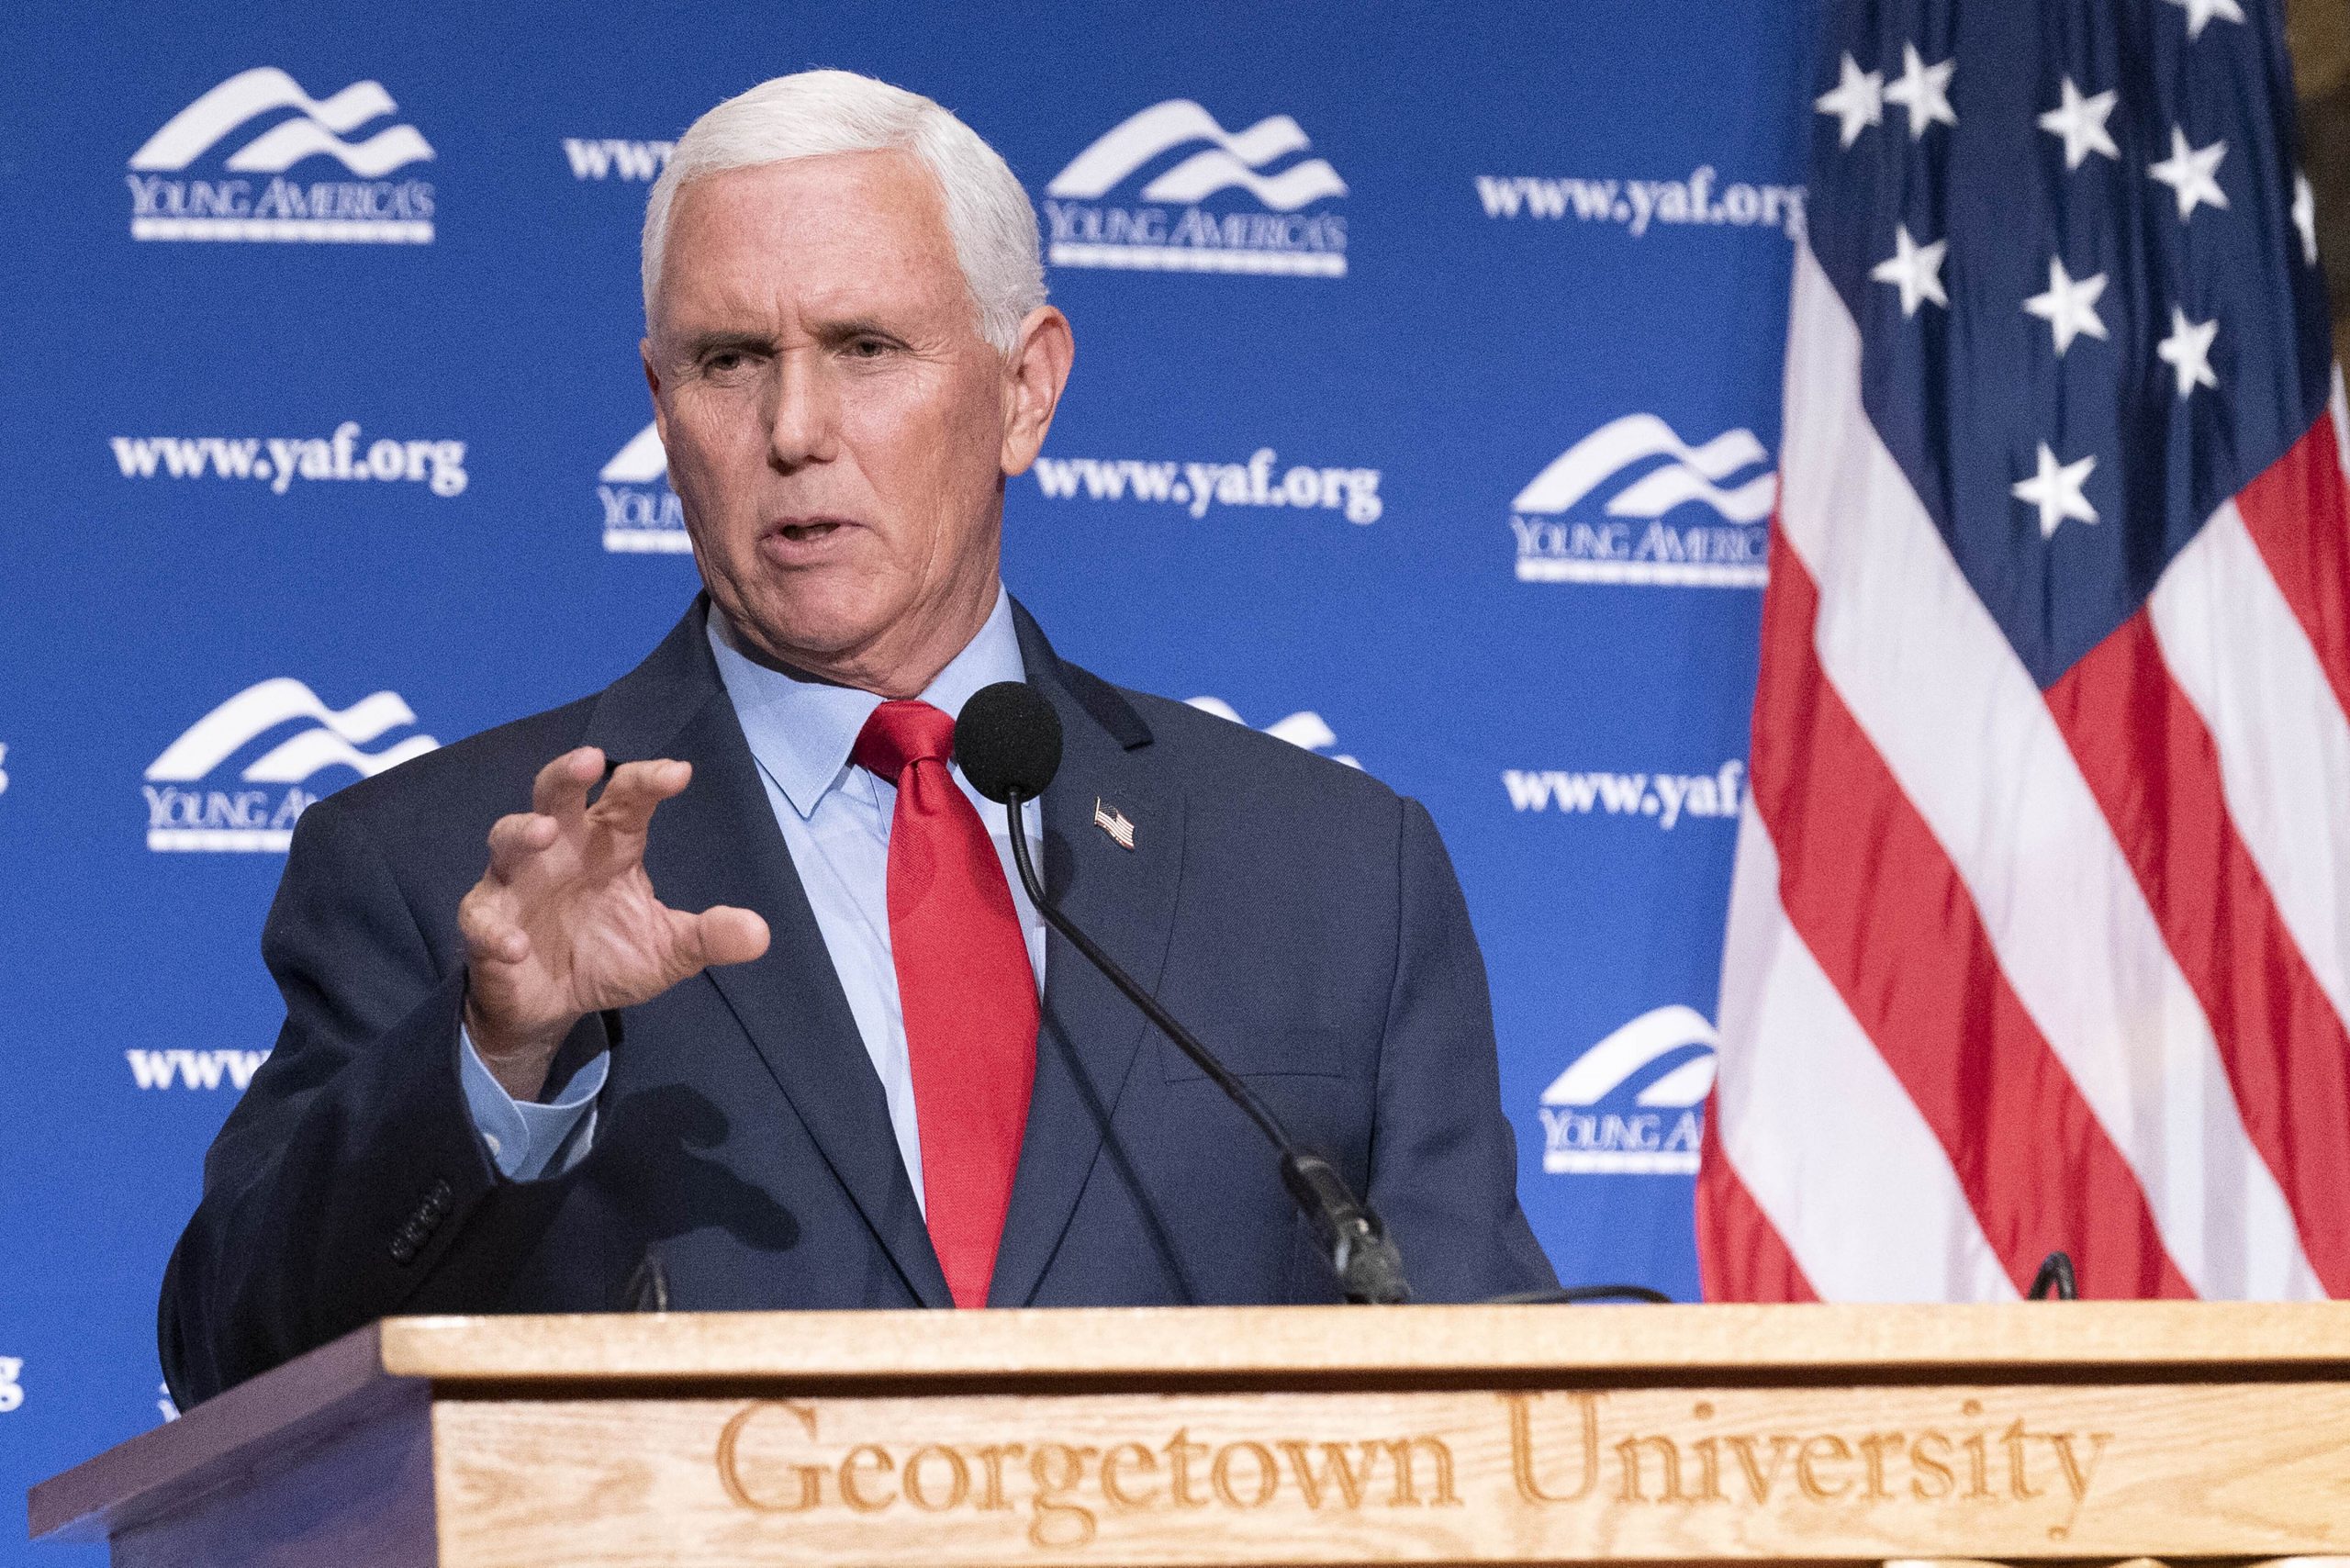 Mike Pence book: Lincoln Project ad annoyed Trump, fuelled his bid to overturn election result